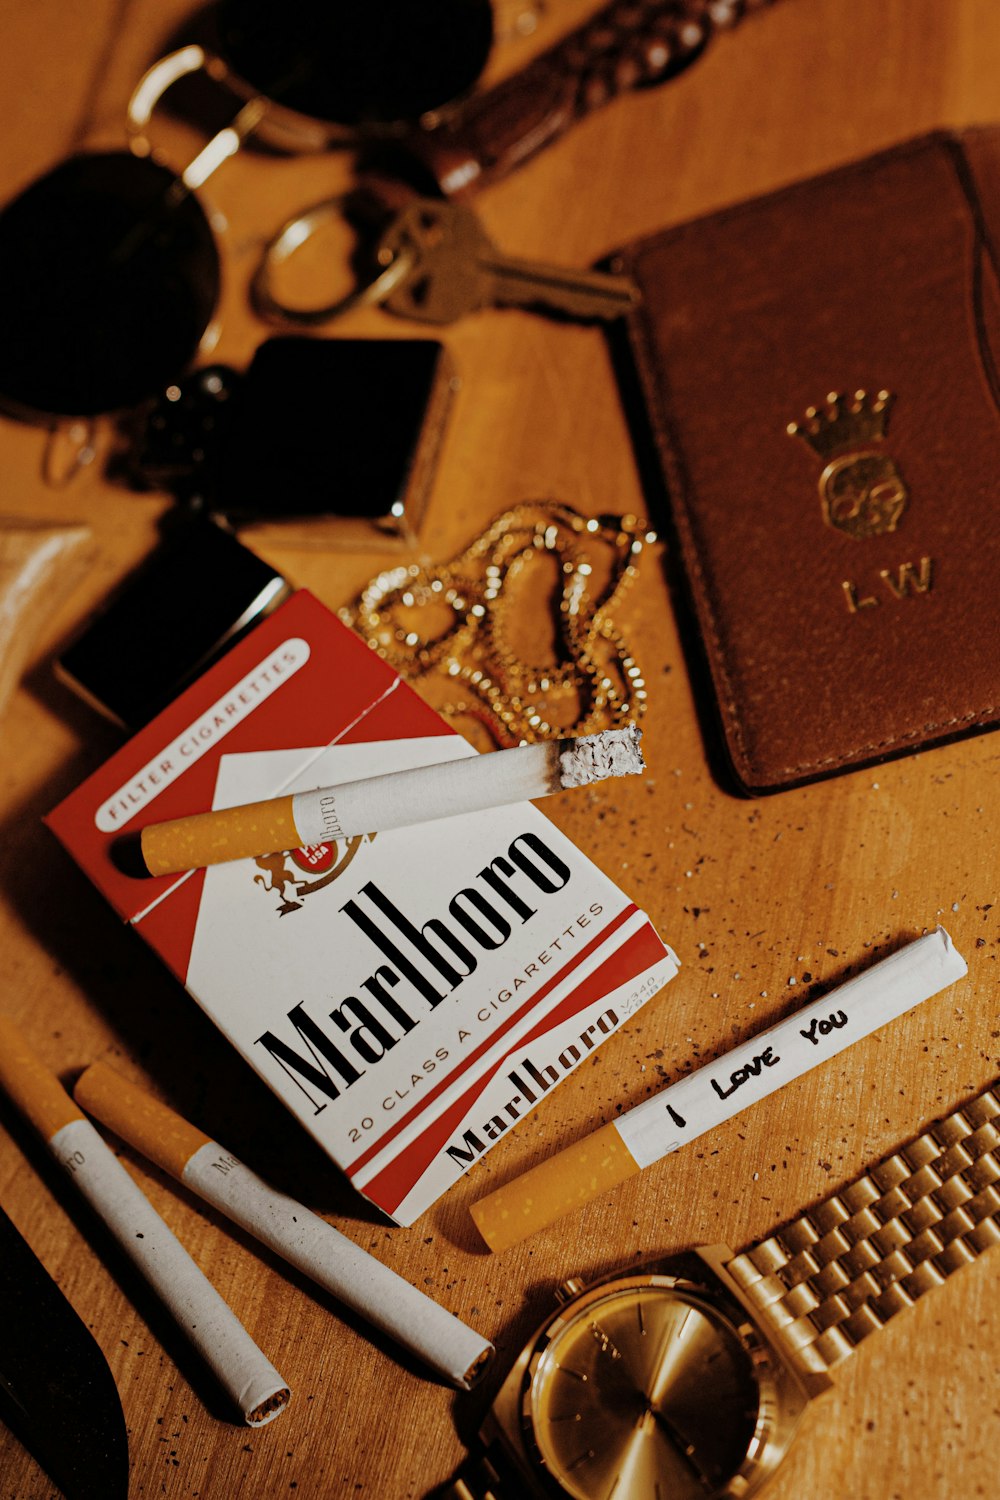 white and red marlboro cigarette pack beside brown leather bifold wallet